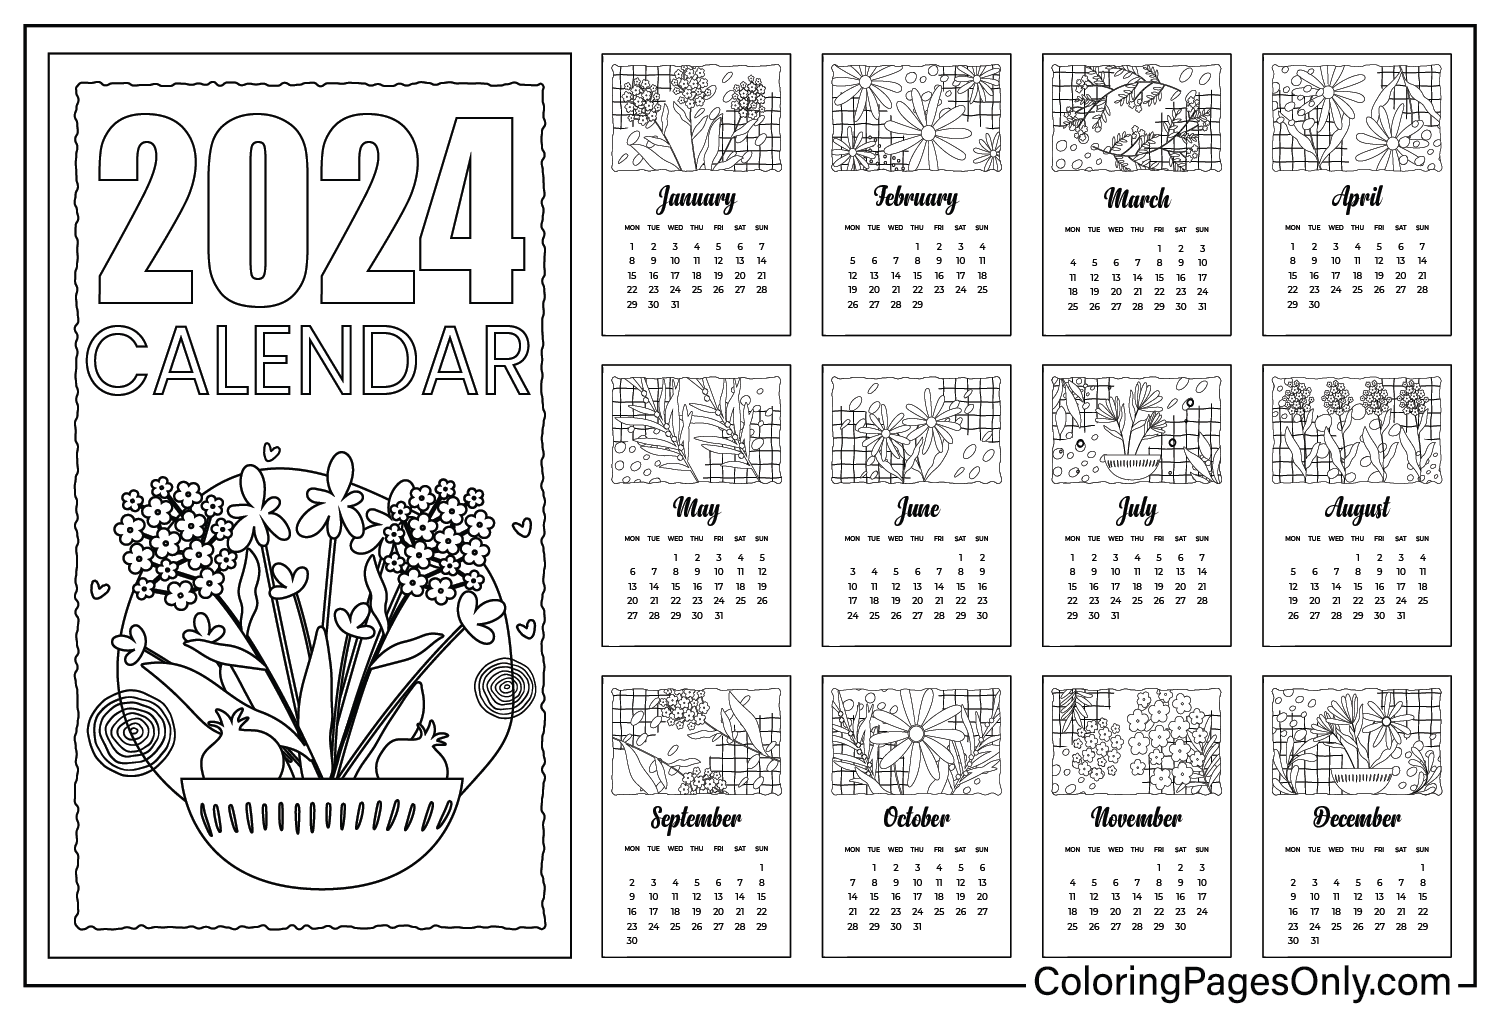 Printable Calendar 2024 Coloring Page from Nature & Seasons